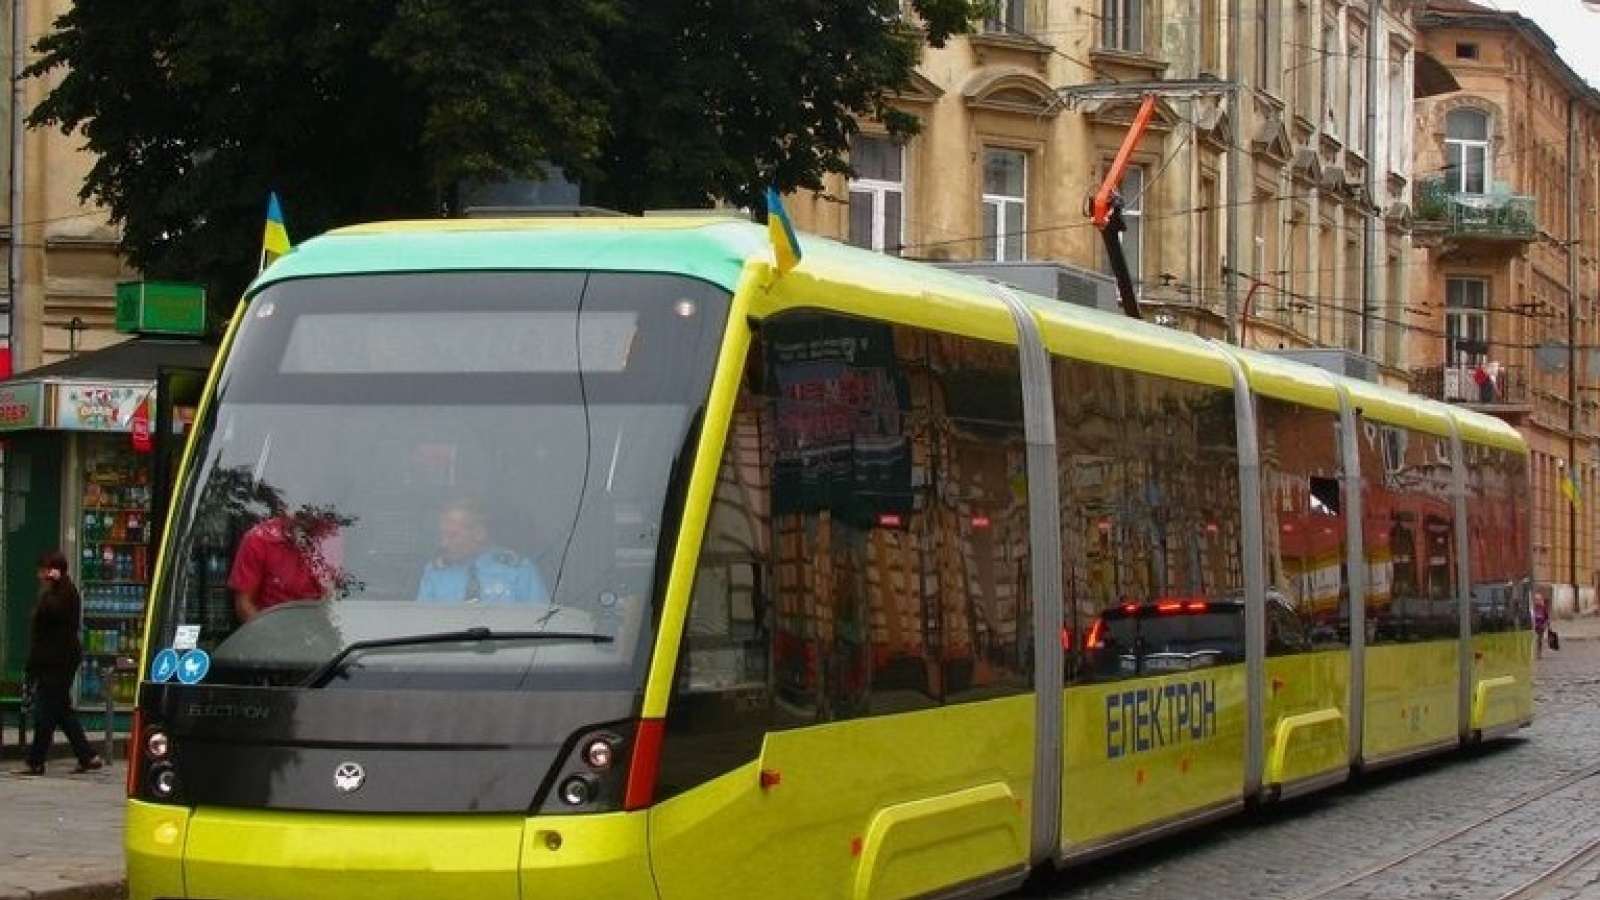 Ukraine: City of Lviv will receive 10 new energy-efficient trams with EU support